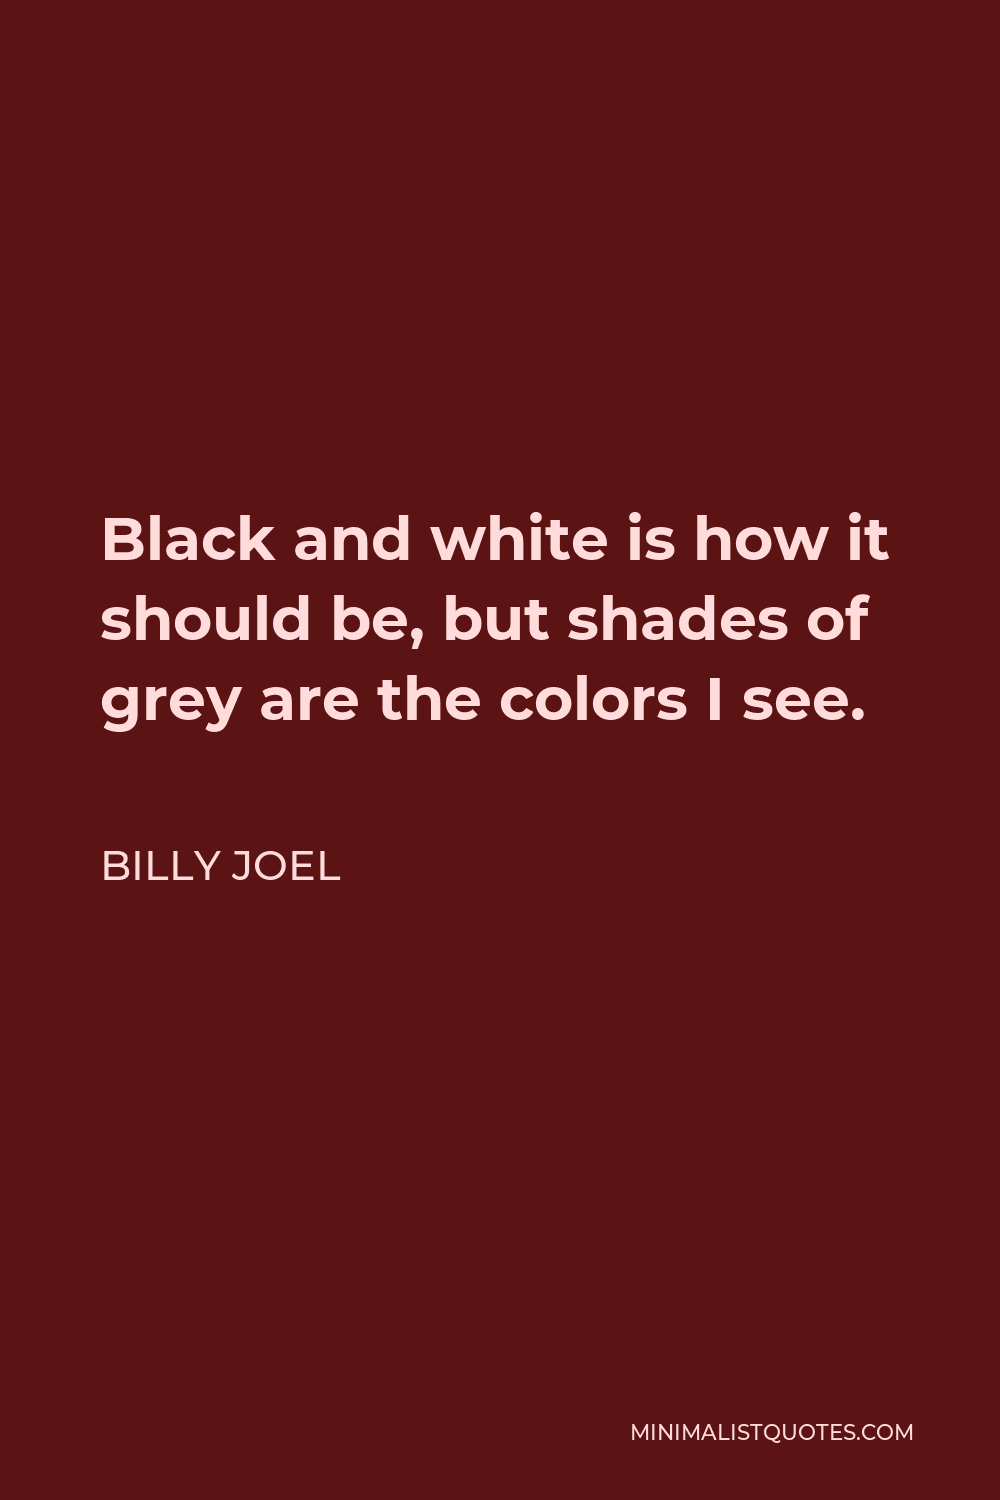 Billy Joel Quote - Black and white is how it should be, but shades of grey are the colors I see.